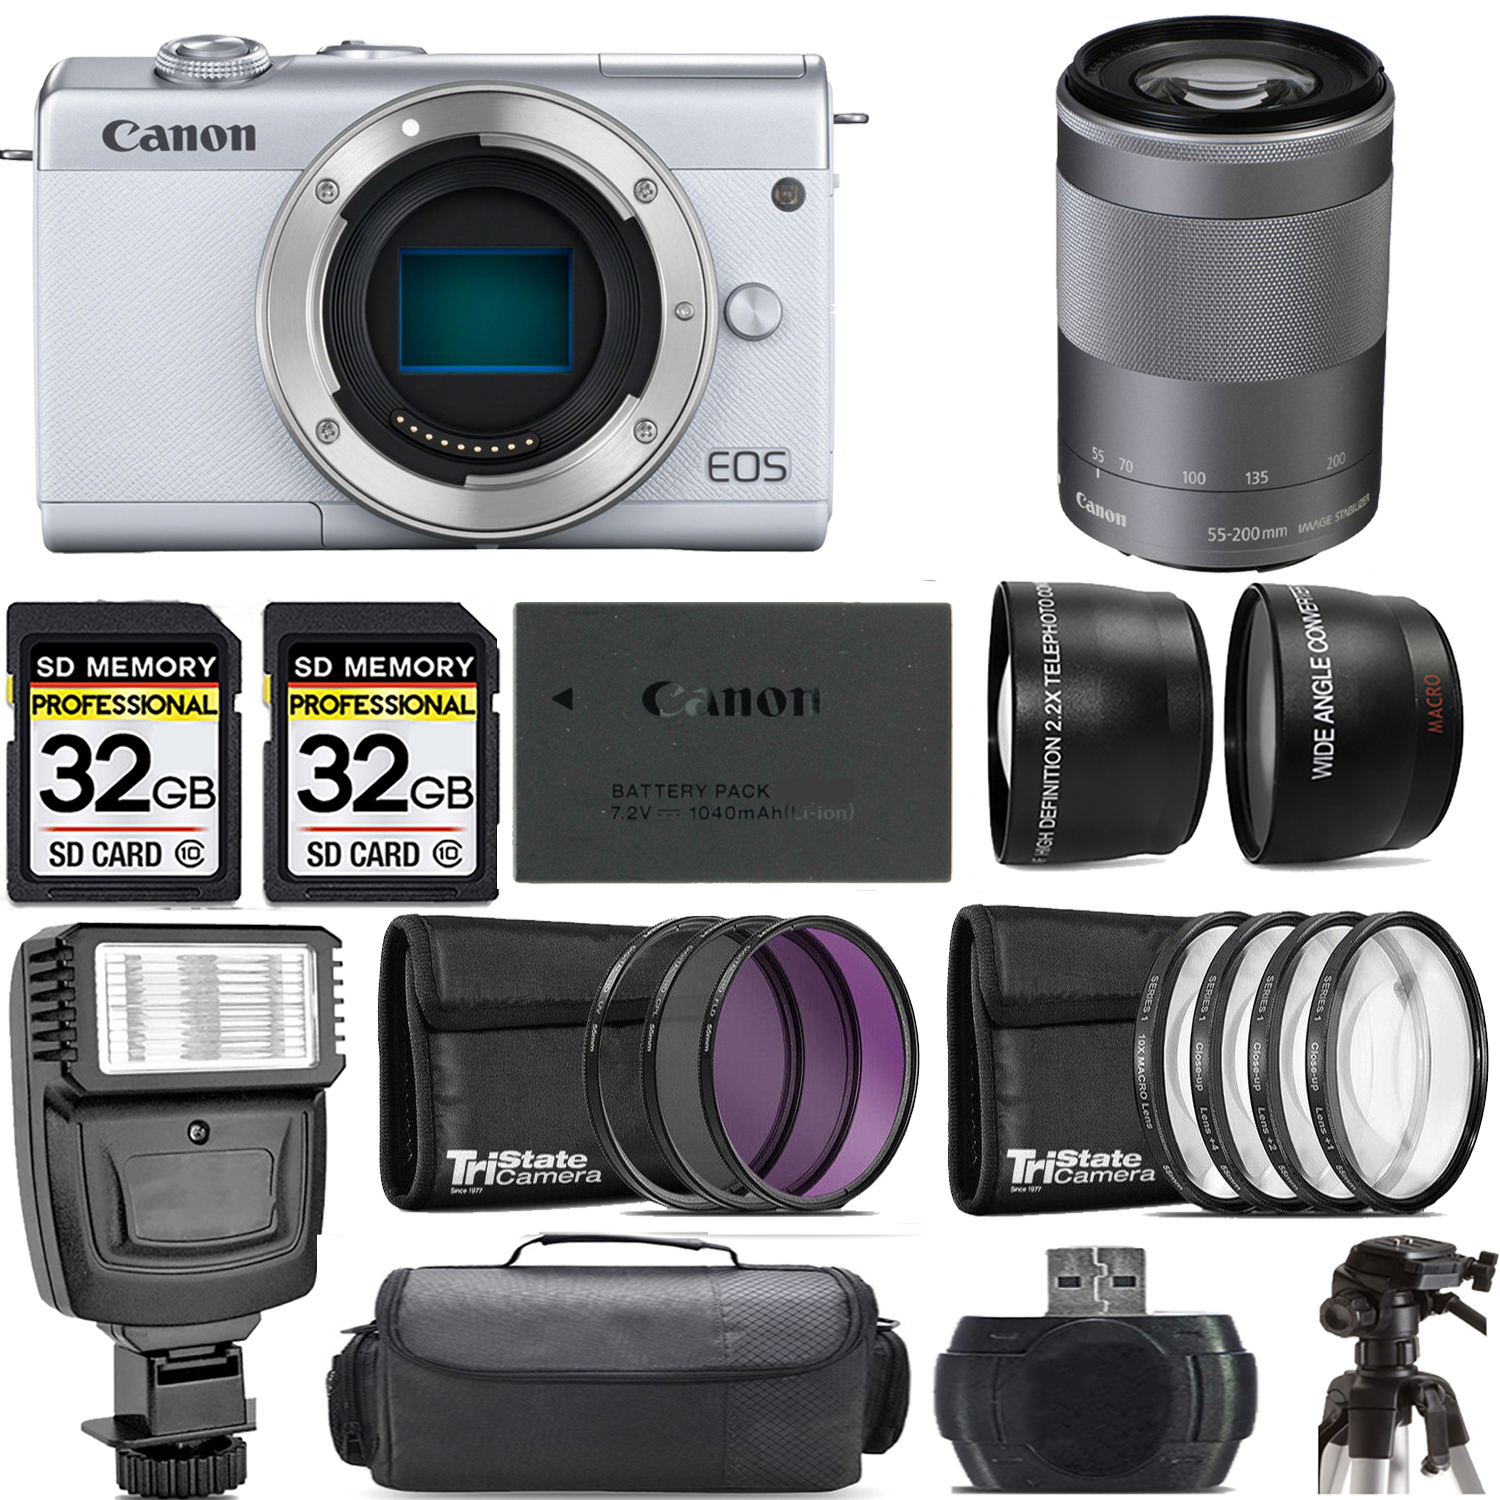 M200 Camera (White) + 55-200mm f/4.5-6.3 IS STM Lens (Silver) + Flash - Kit *FREE SHIPPING*